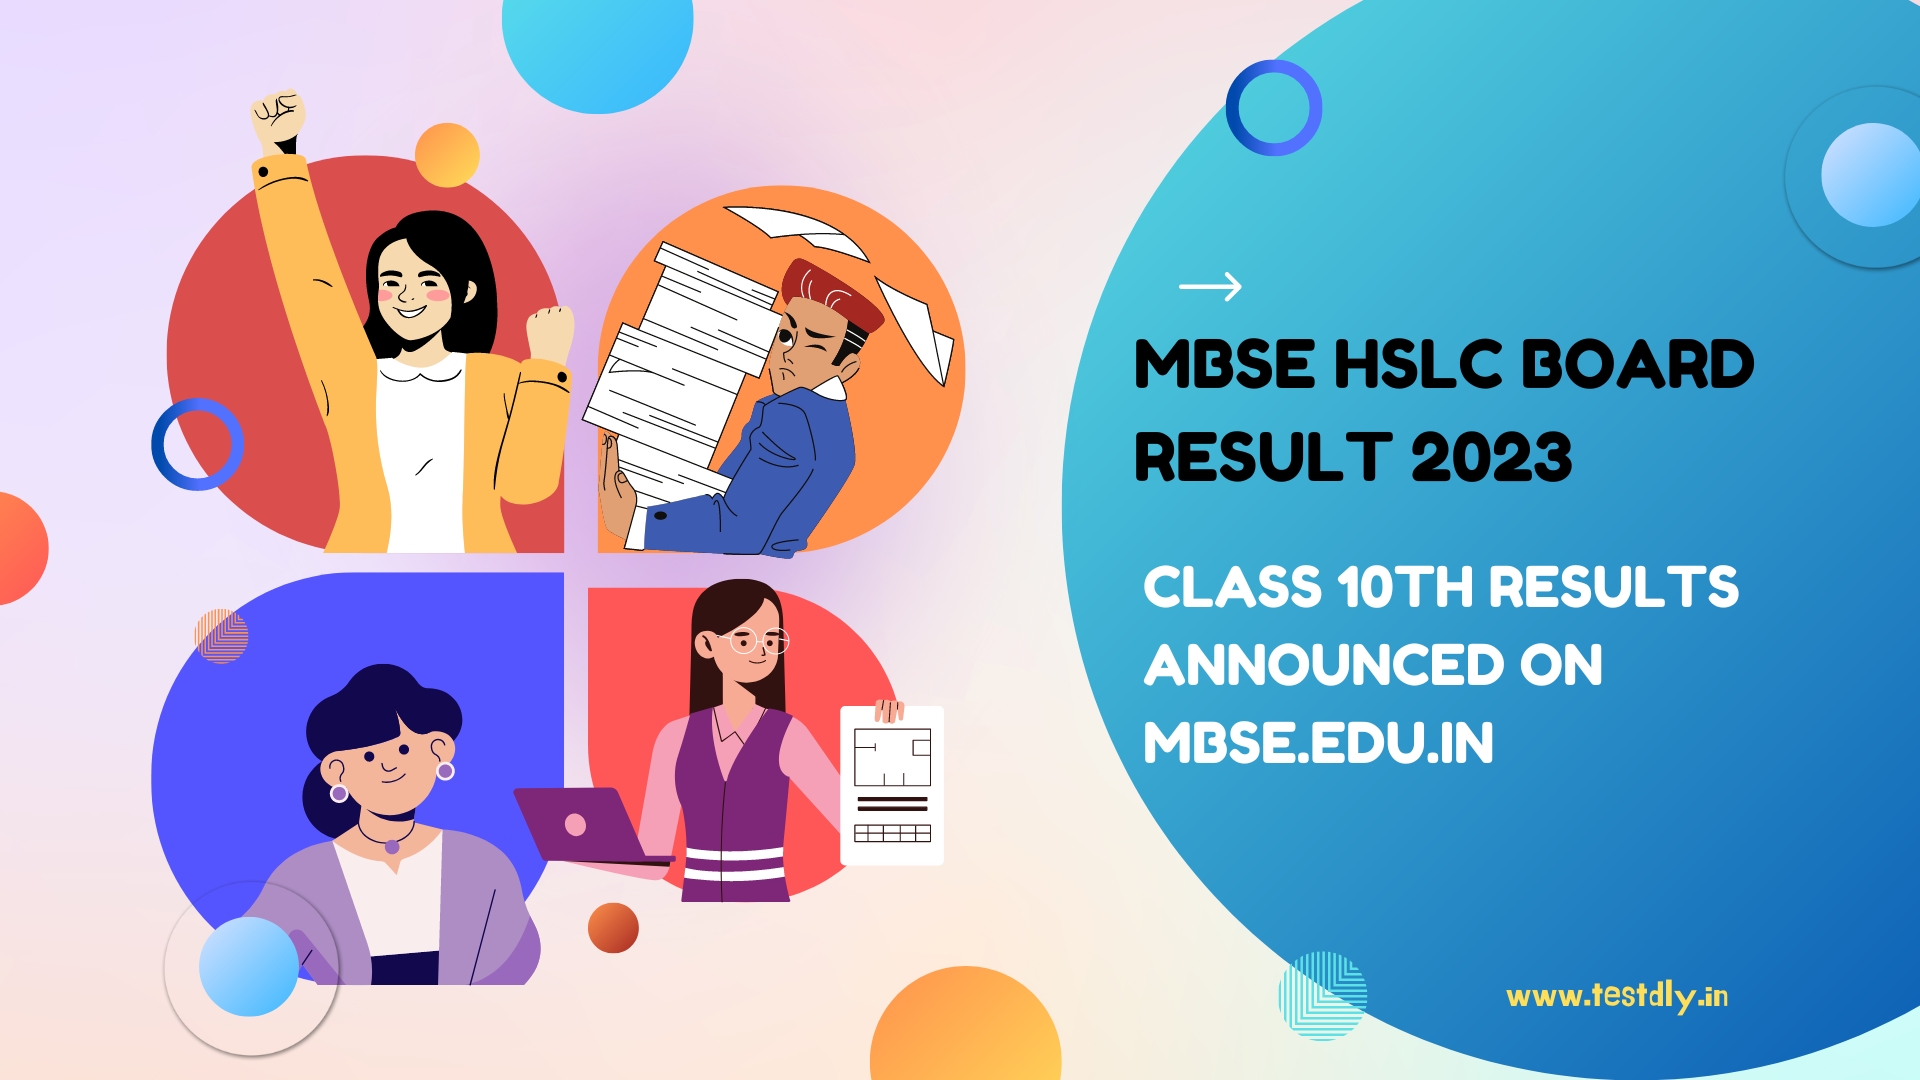 MBSE HSLC Board Result 2023: Class 10th Results Announced on mbse.edu.in - Find Step-by-Step Guide and Direct Link for Checking